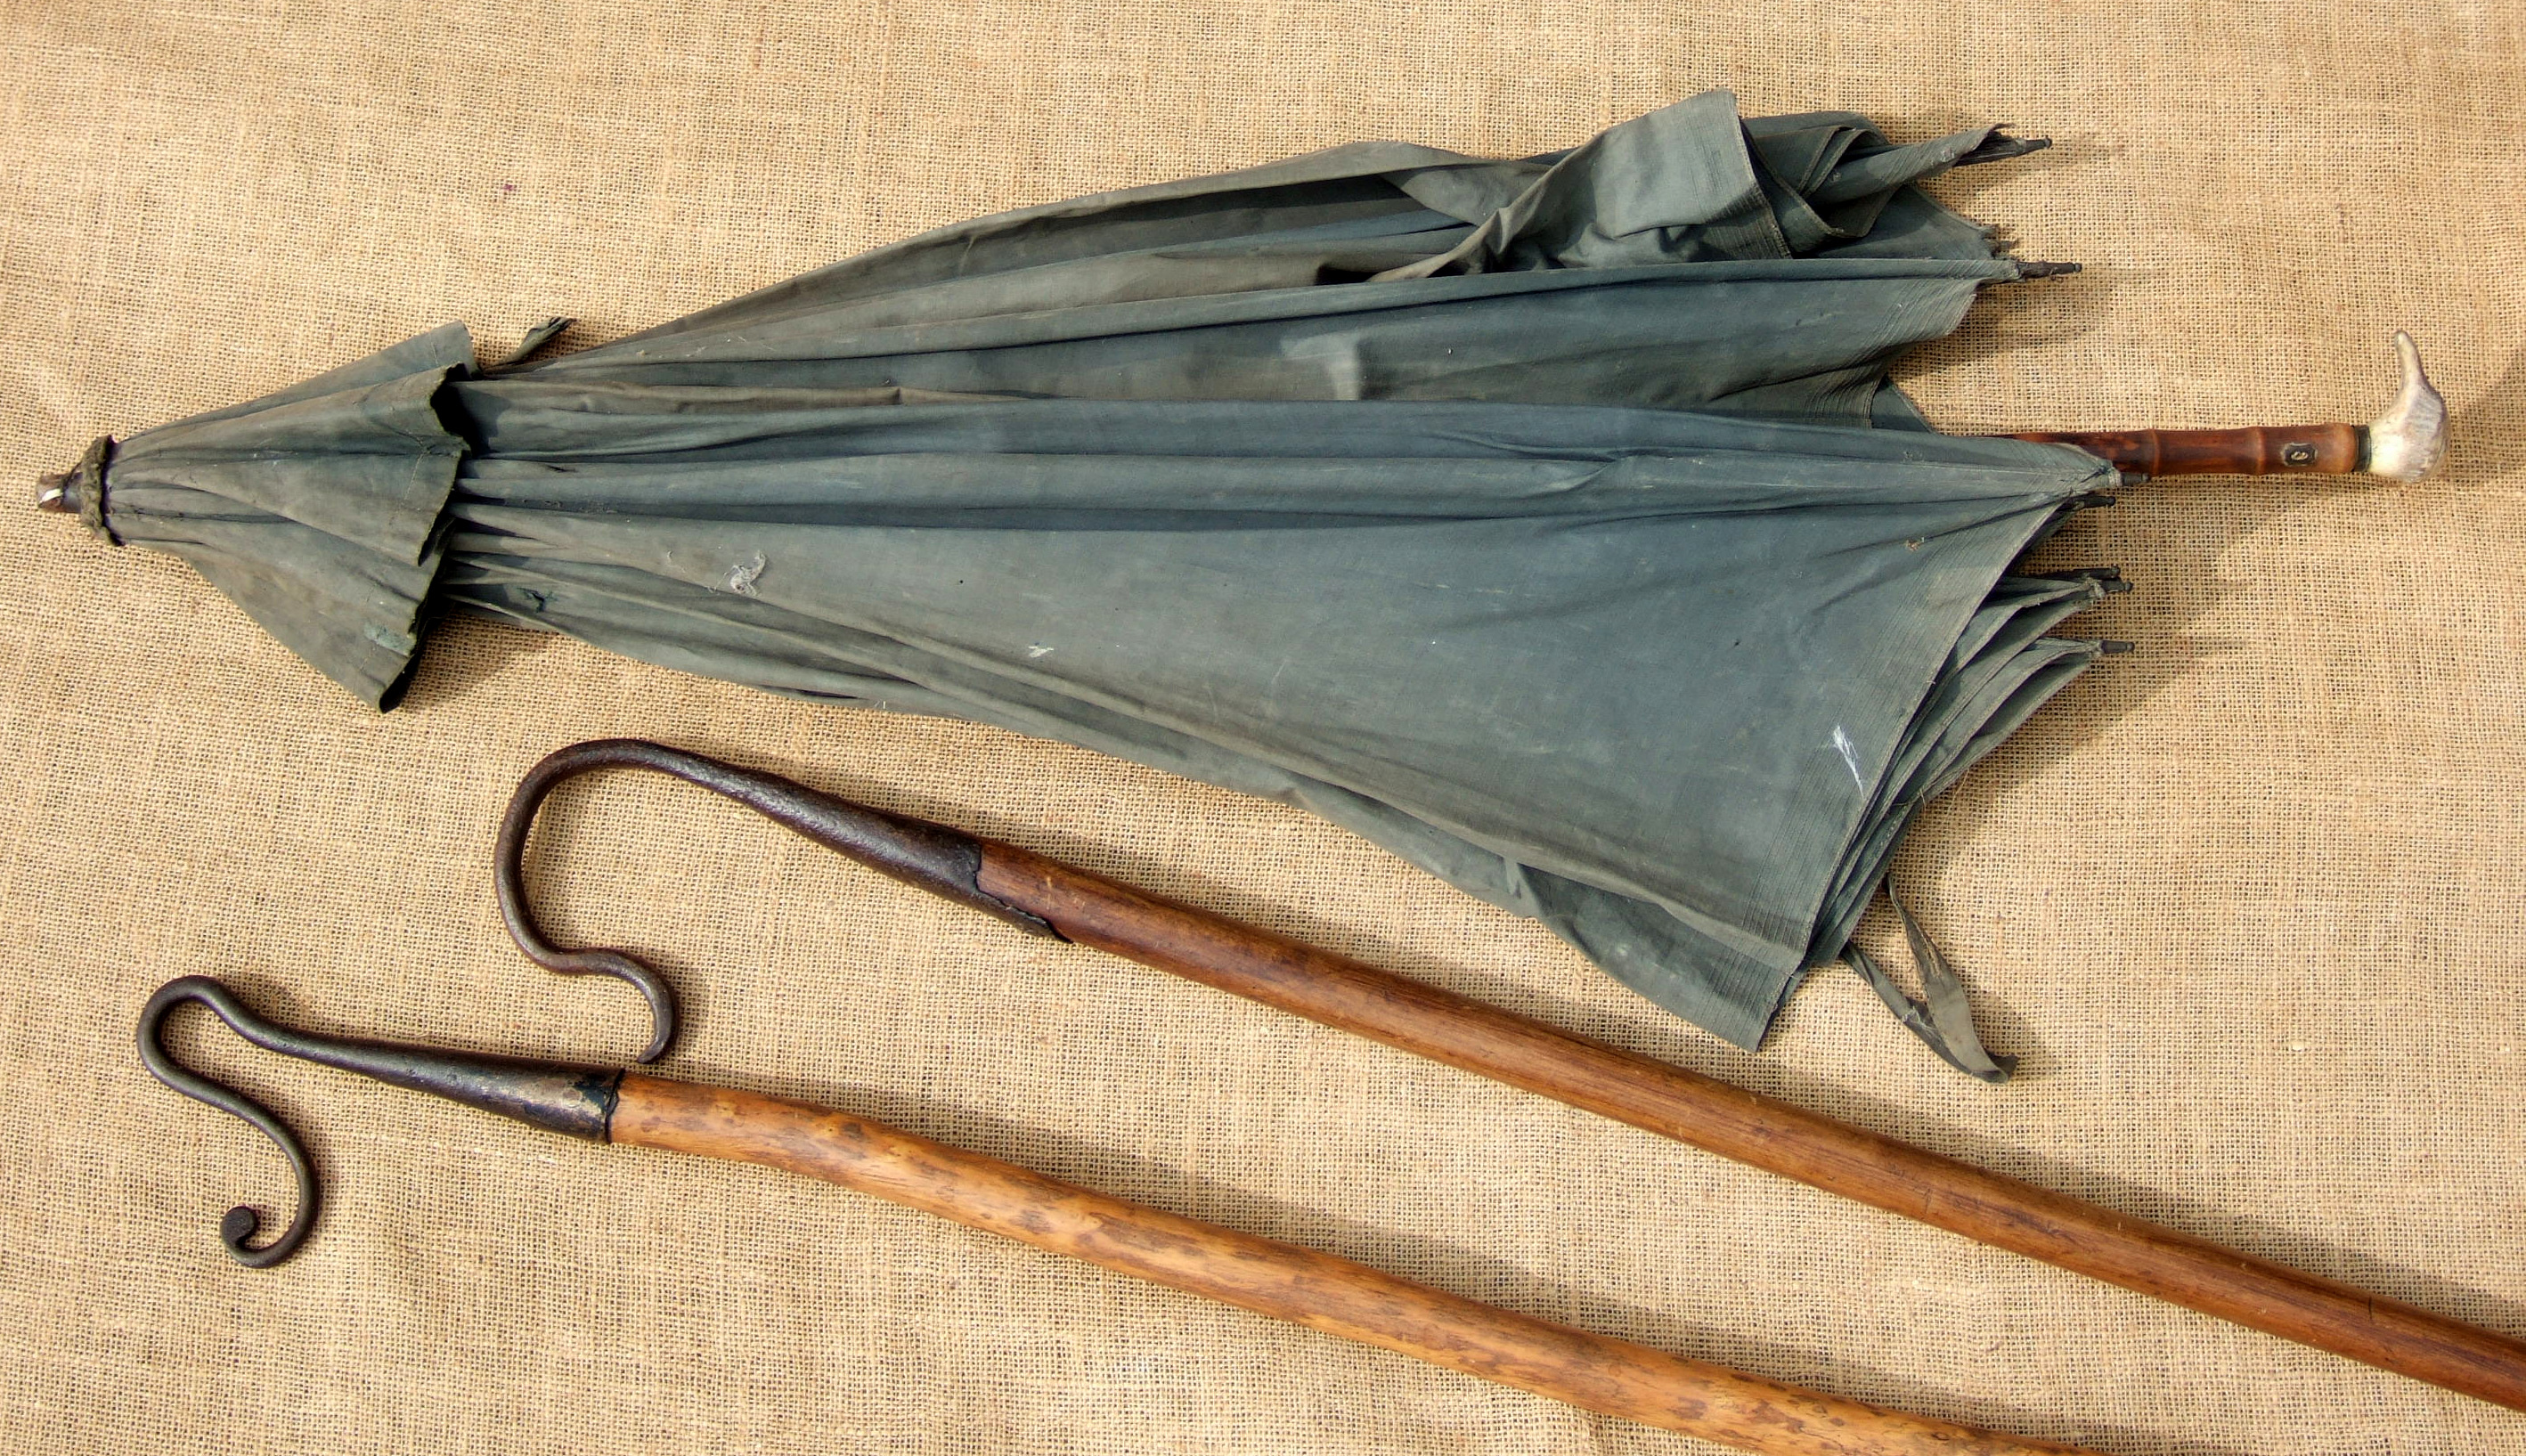 A SHEPHERD’S NECK CROOK, A LEG CROOK AND A RUSTIC UMBRELLA. The Sussex crooks are 19th century.